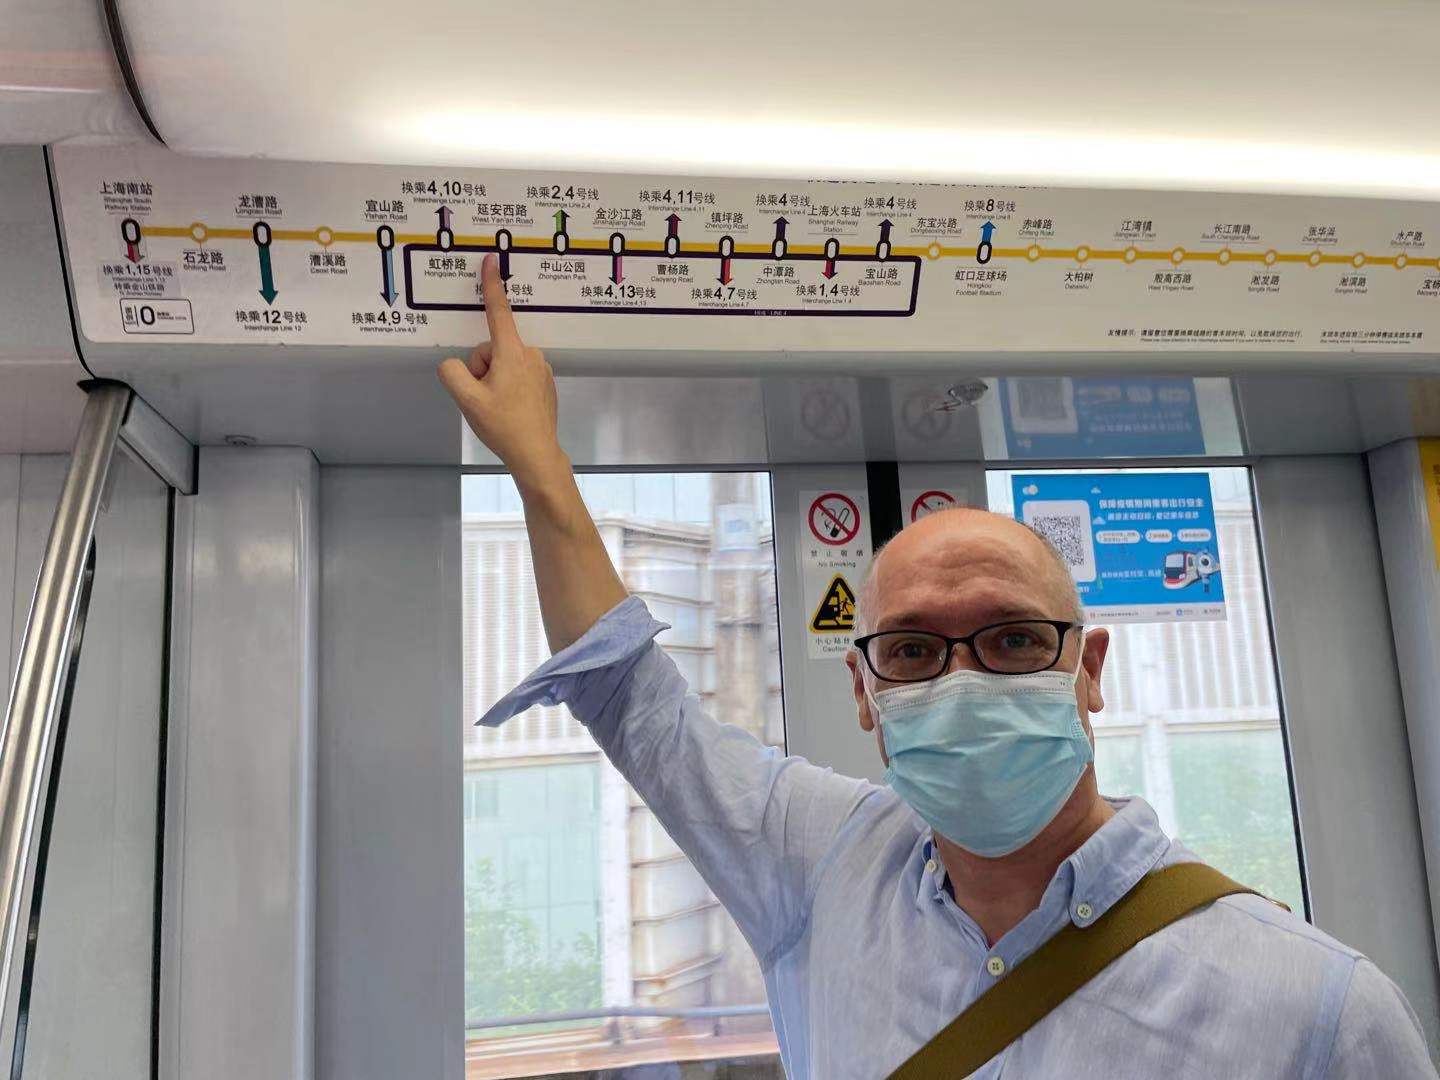 Meet the Man Who Rode Every Shanghai Metro Line in One Go